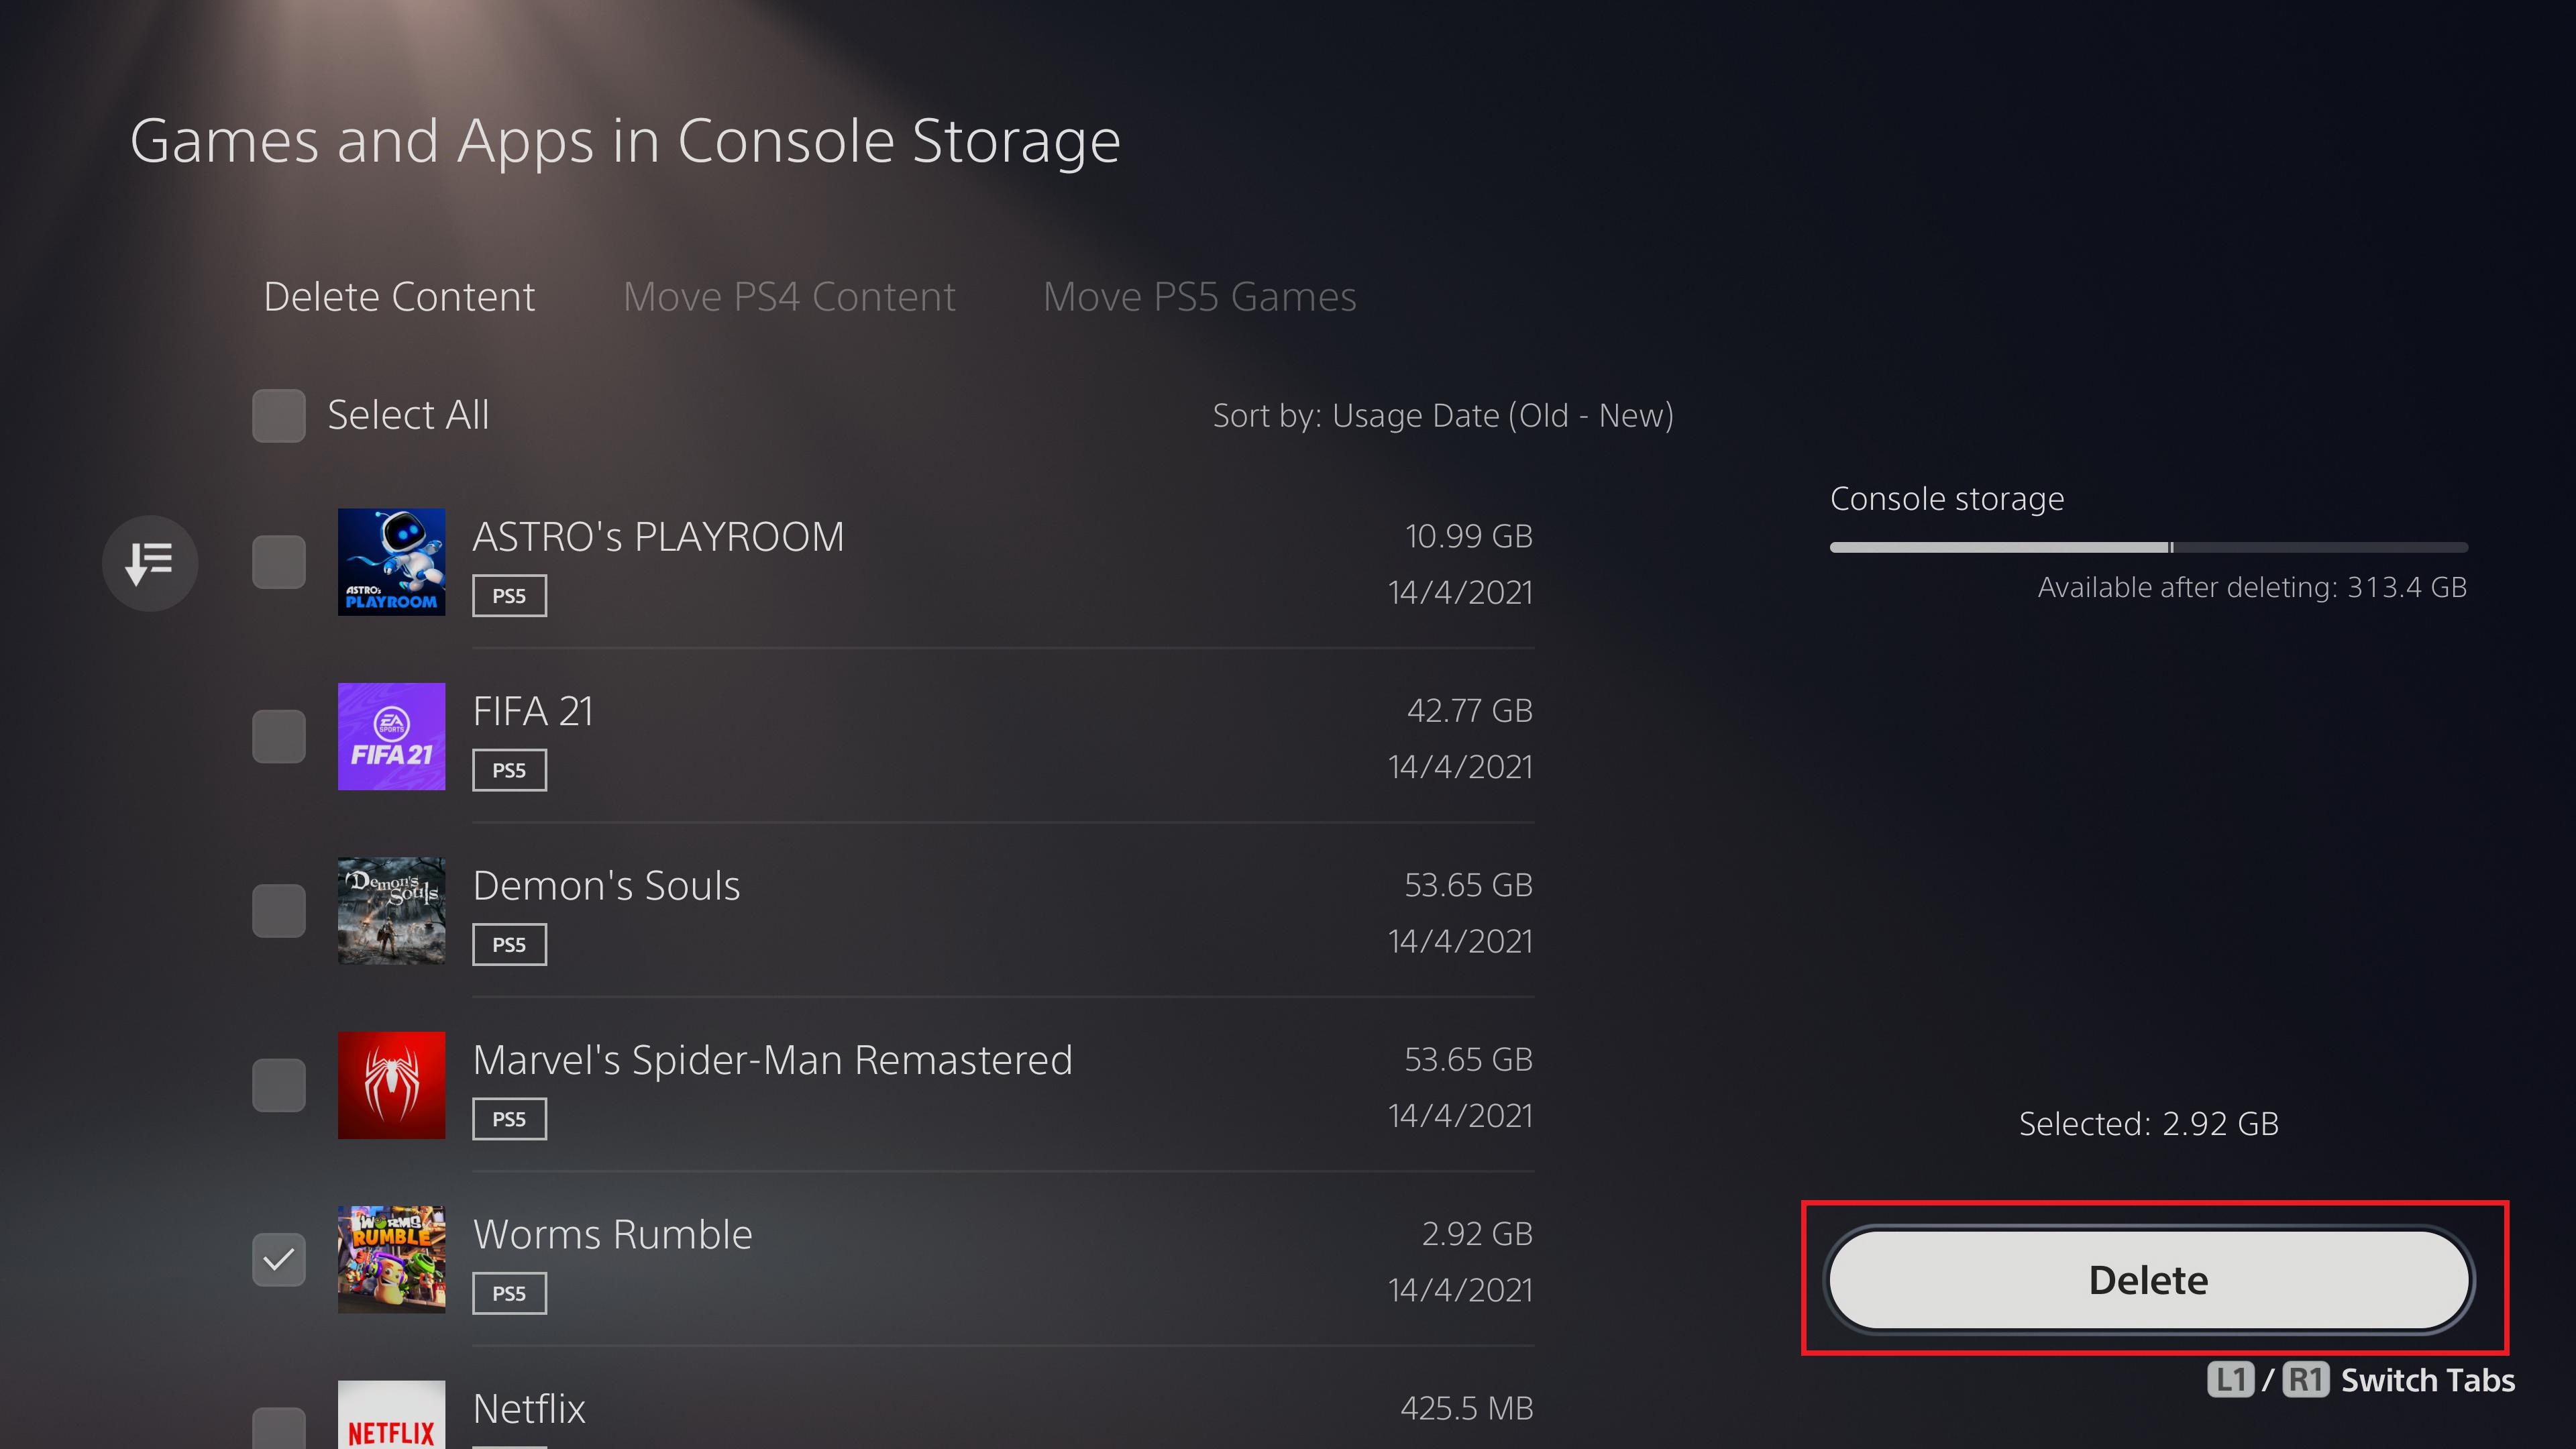 How to delete games on PS5 - remove unwanted games